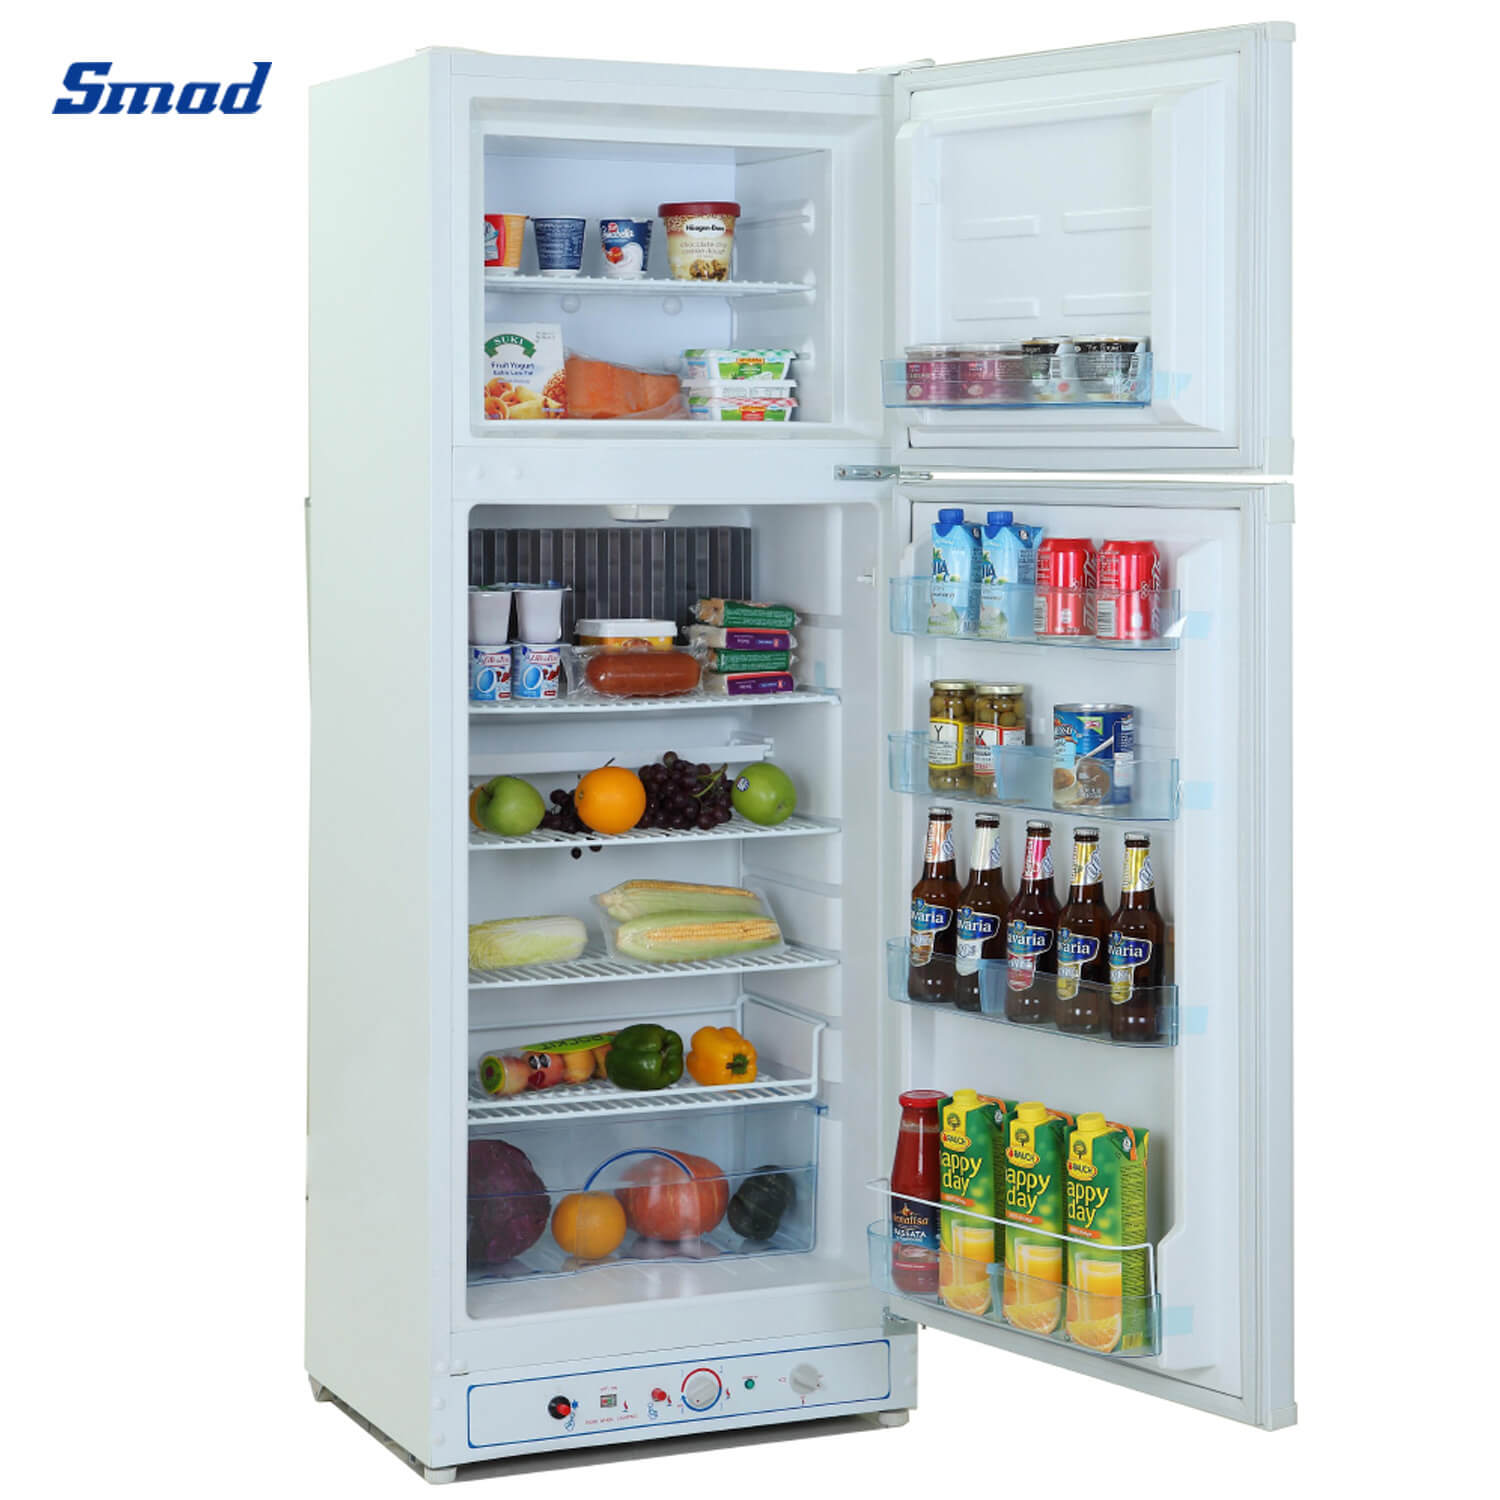 Smad Gas / Absorption Double Door Refrigerator with Advanced absorption cooling system